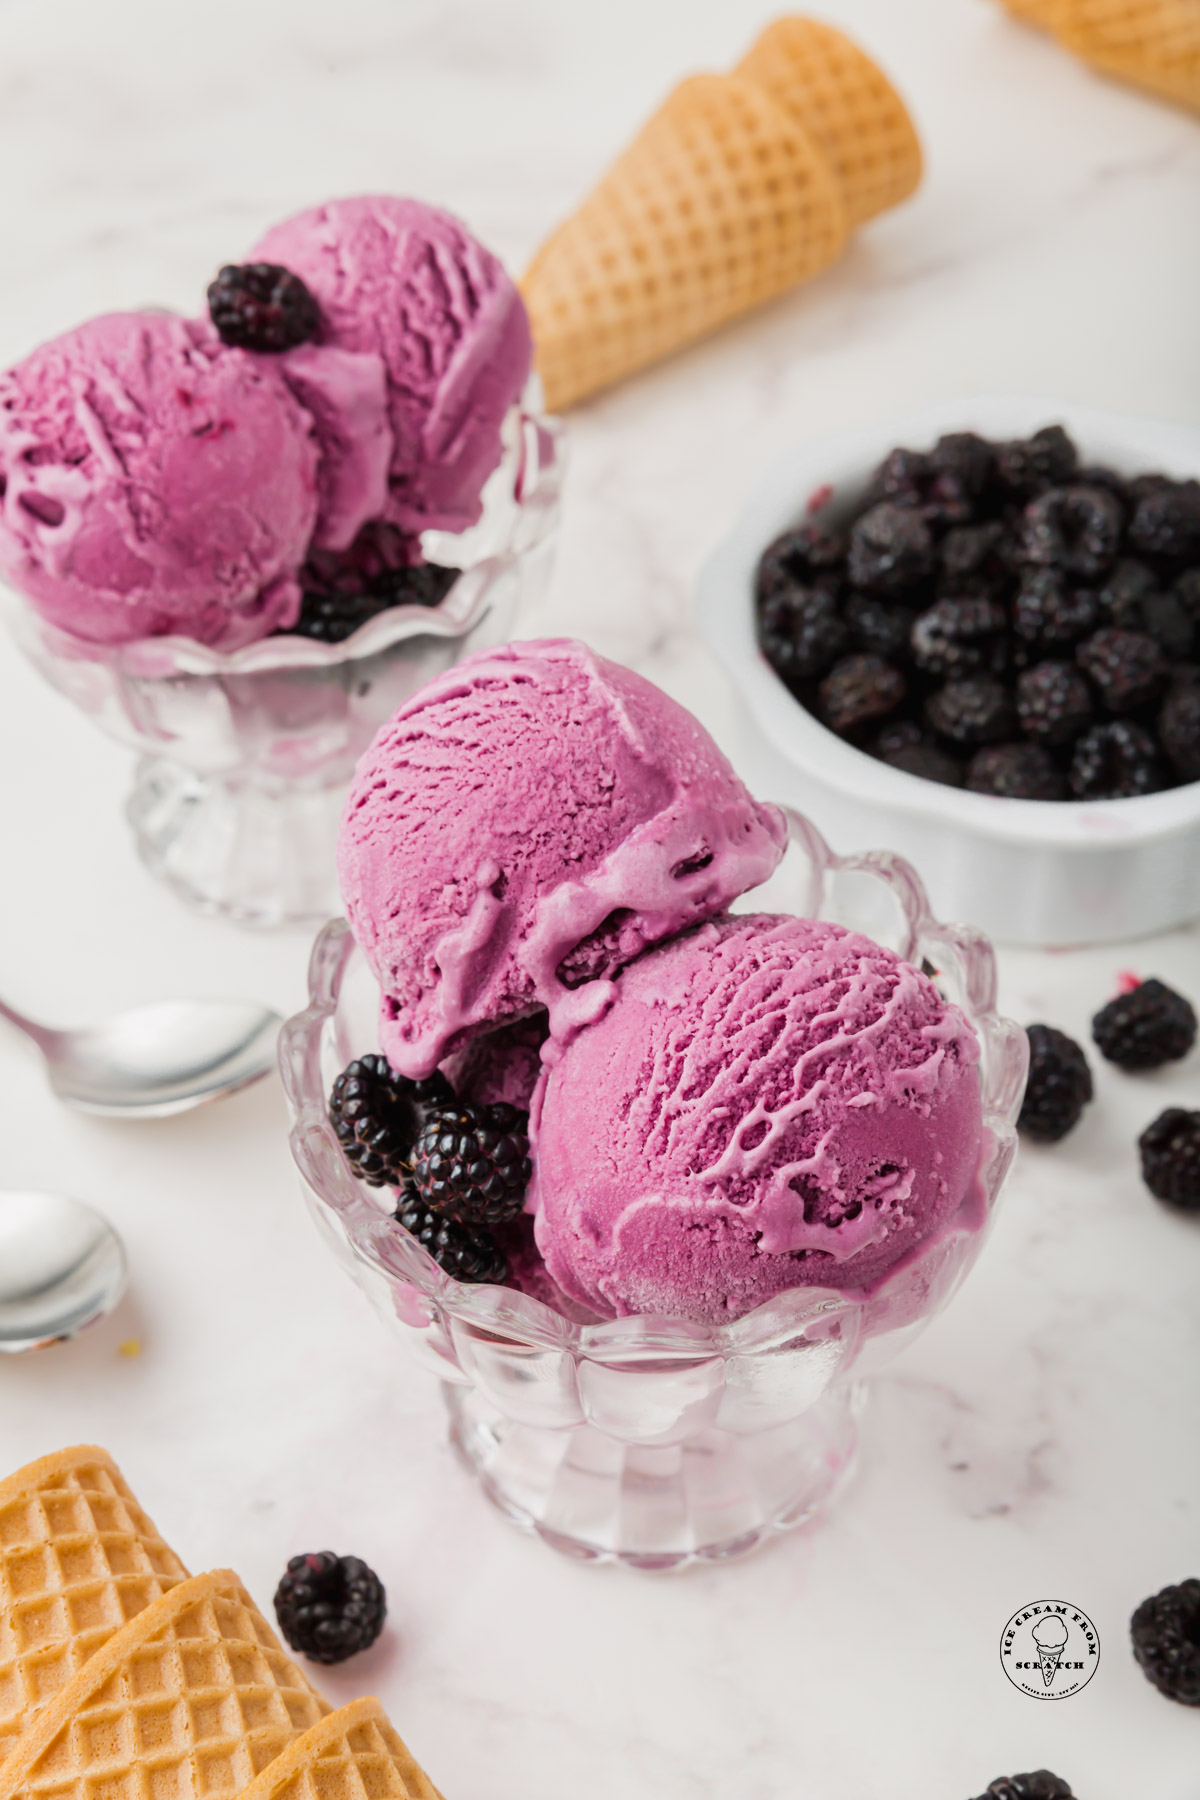 two dishes of blackberry ice cream with fresh blackberries. On the counter are sugar cones and spoons.